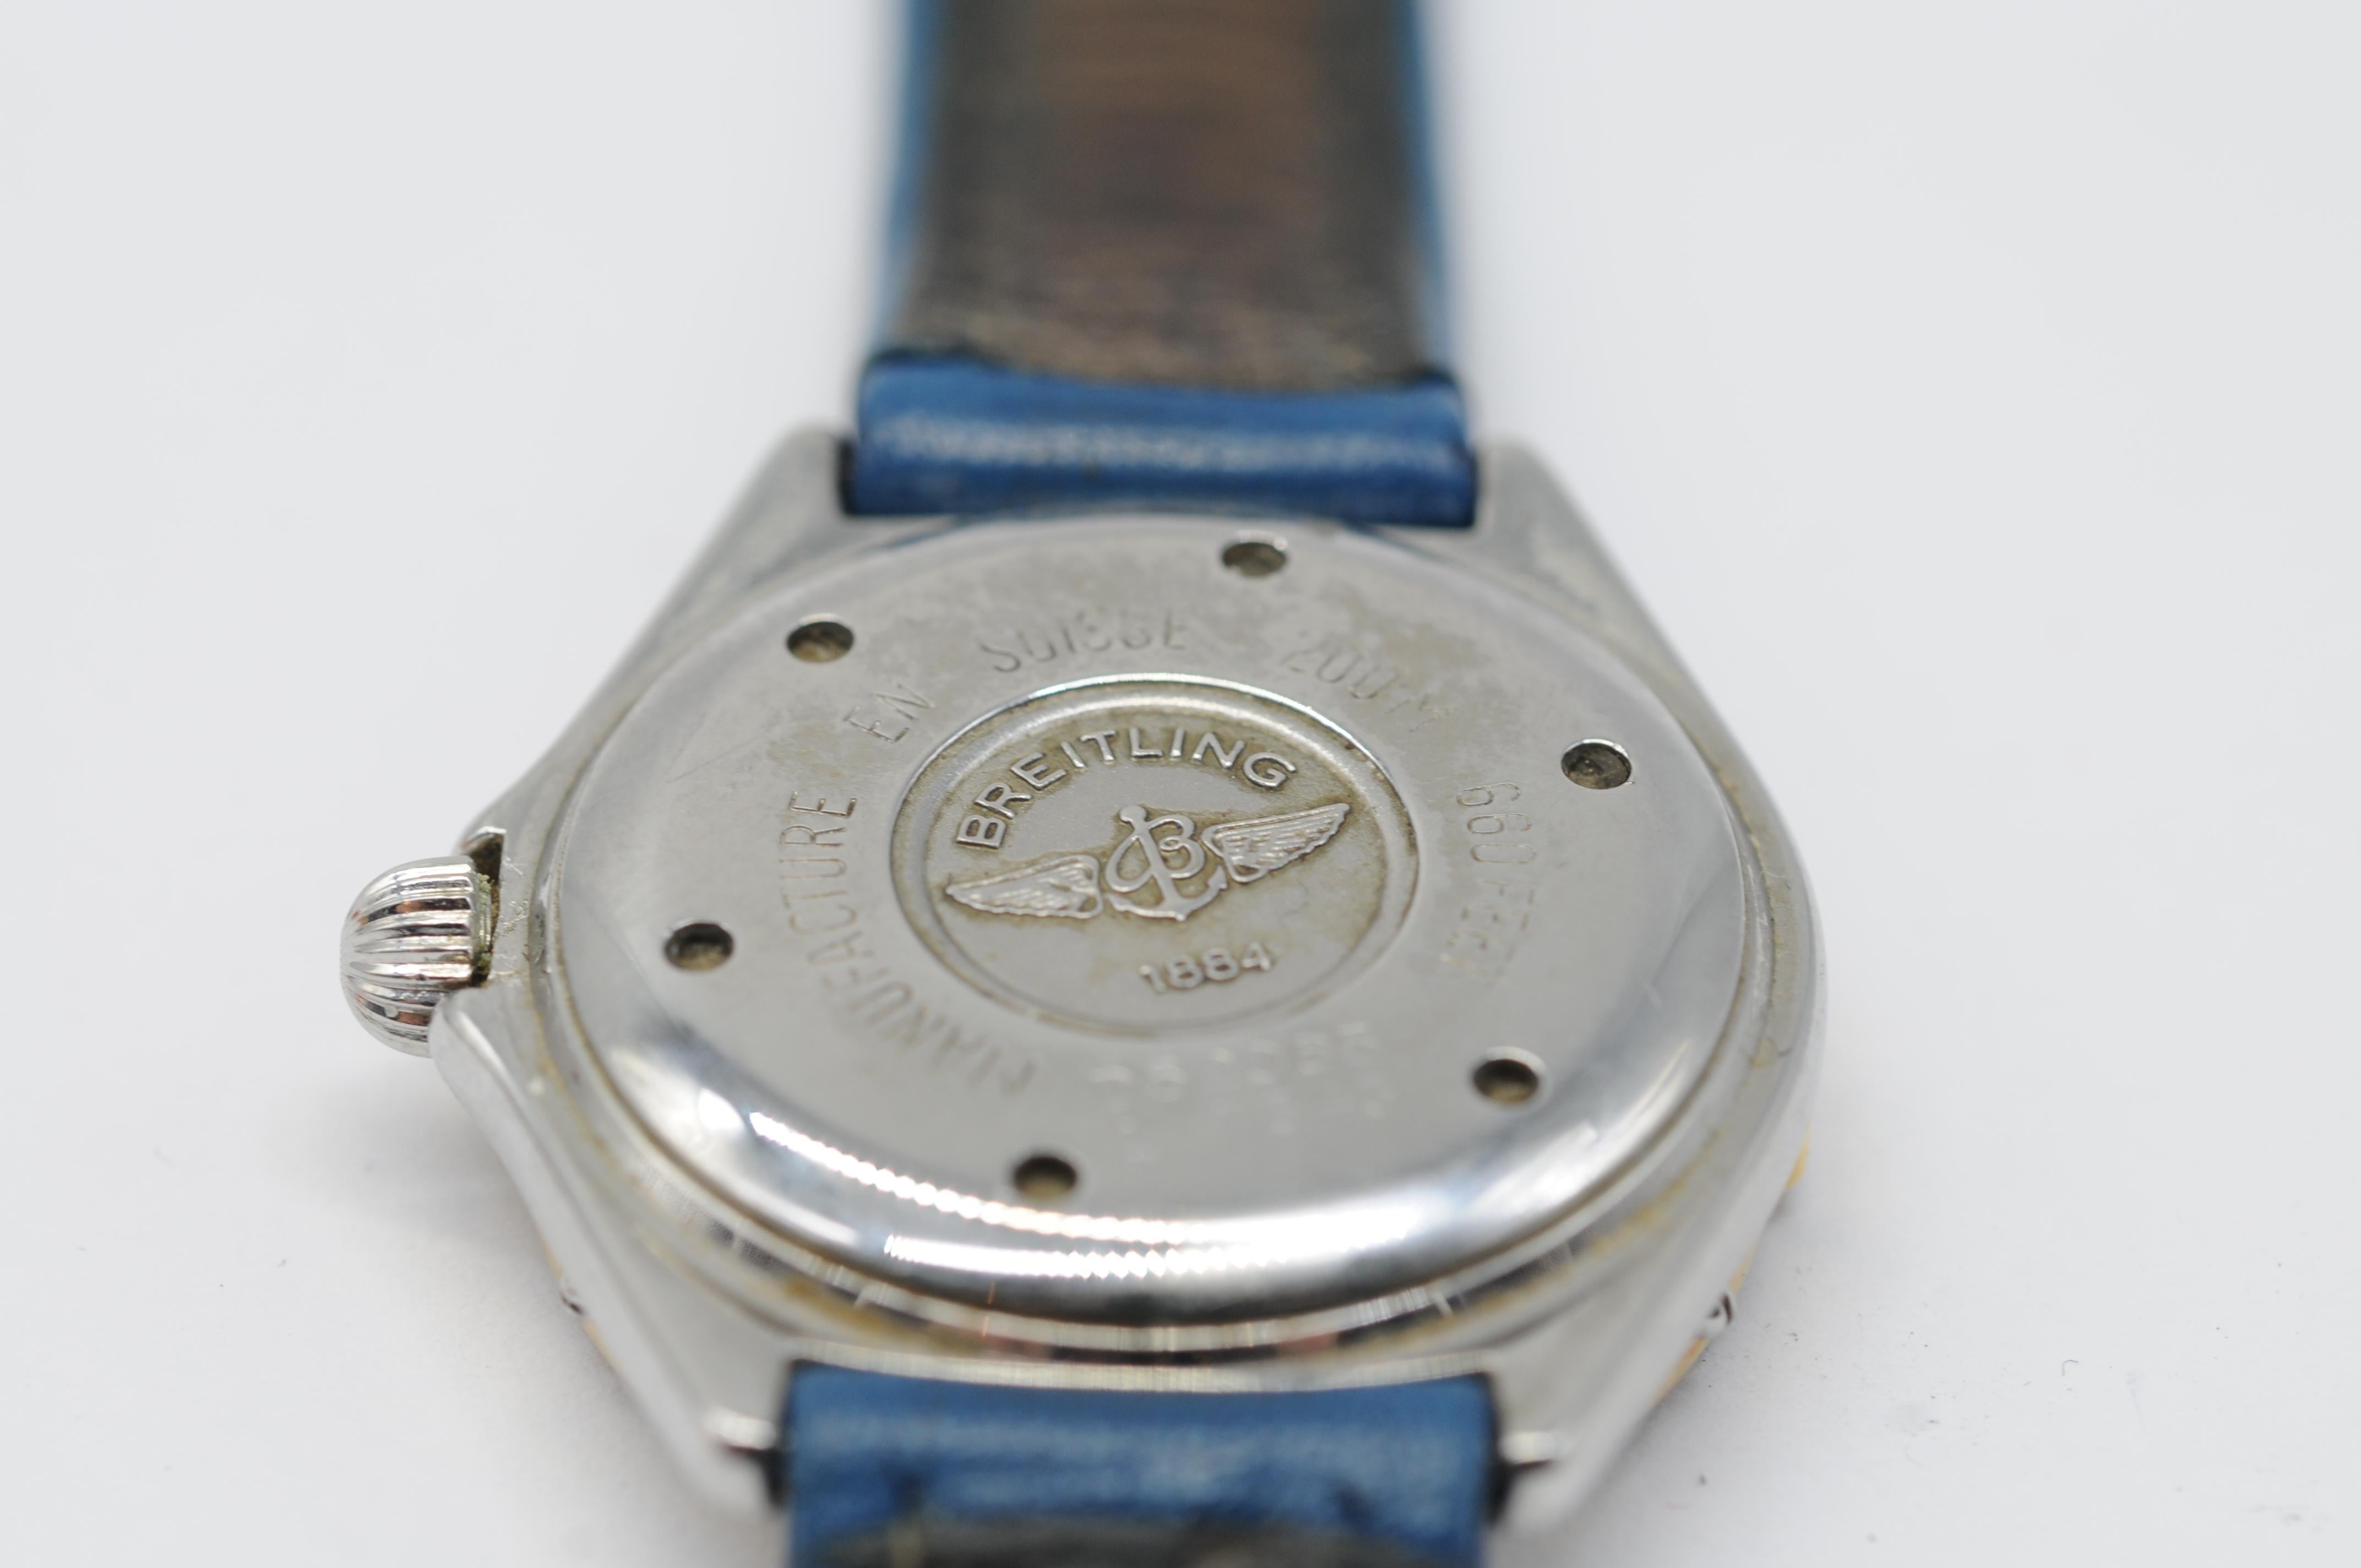 Breitling Lady J D52065 with a deep blue leather strap For Sale 14